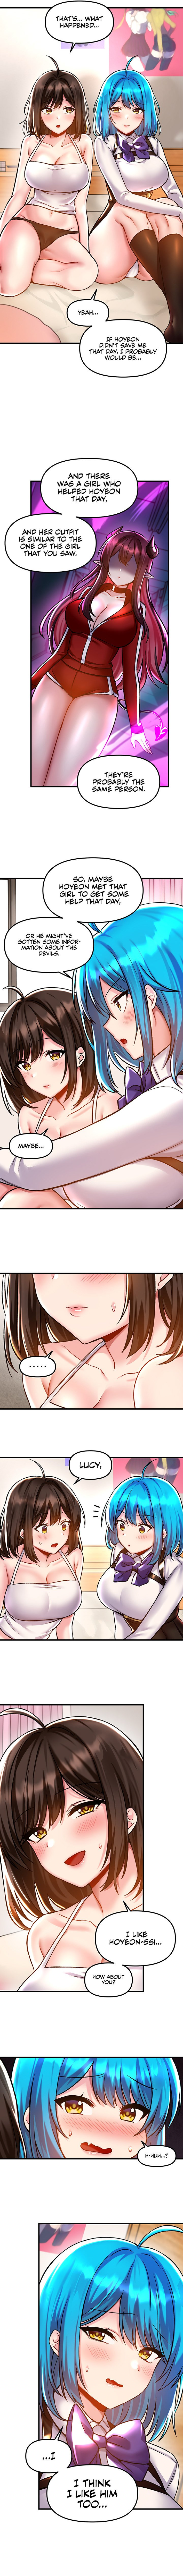 trapped-in-the-academys-eroge-chap-41-7